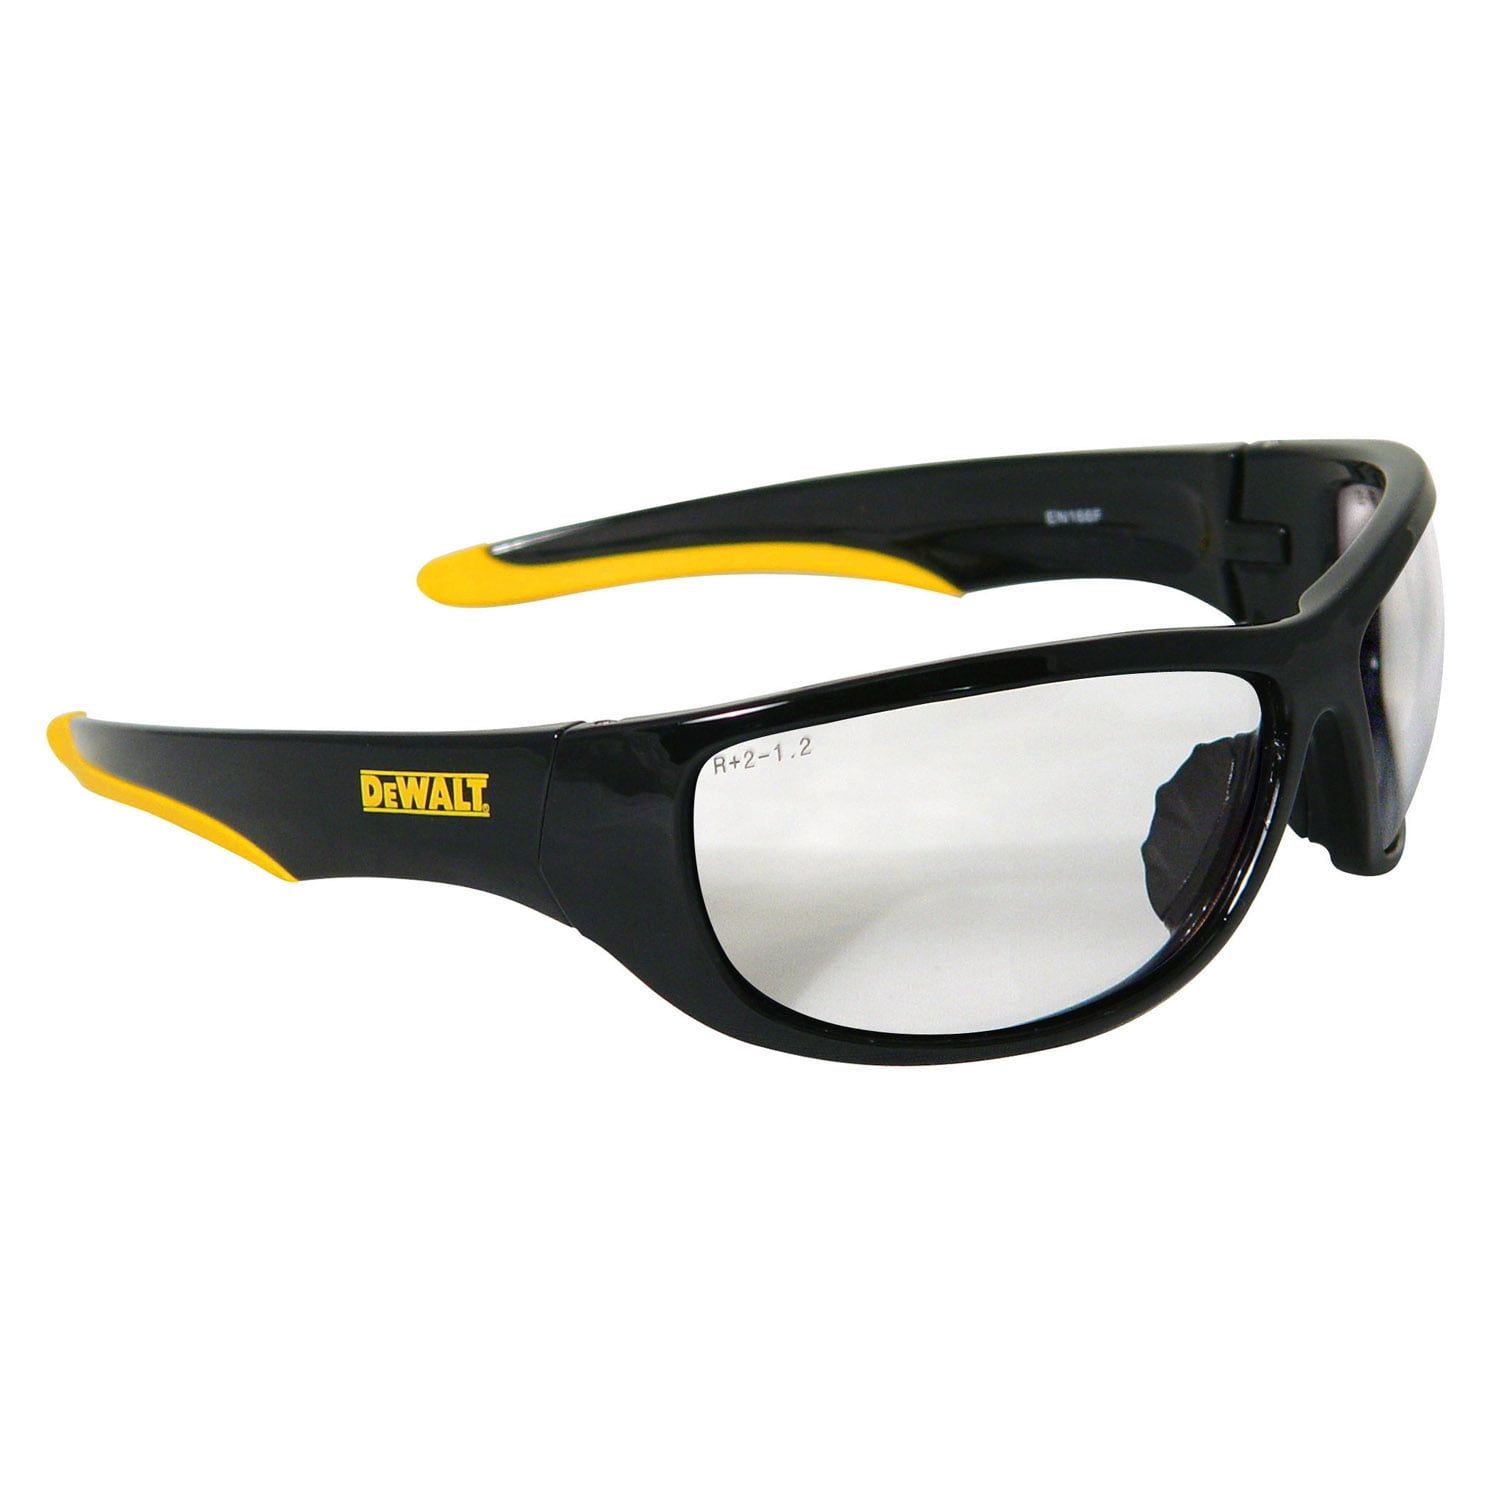 DeWALT Contractor Pro Economy Safety Glasses 8 Lens Shades FAST SHIPPING! 